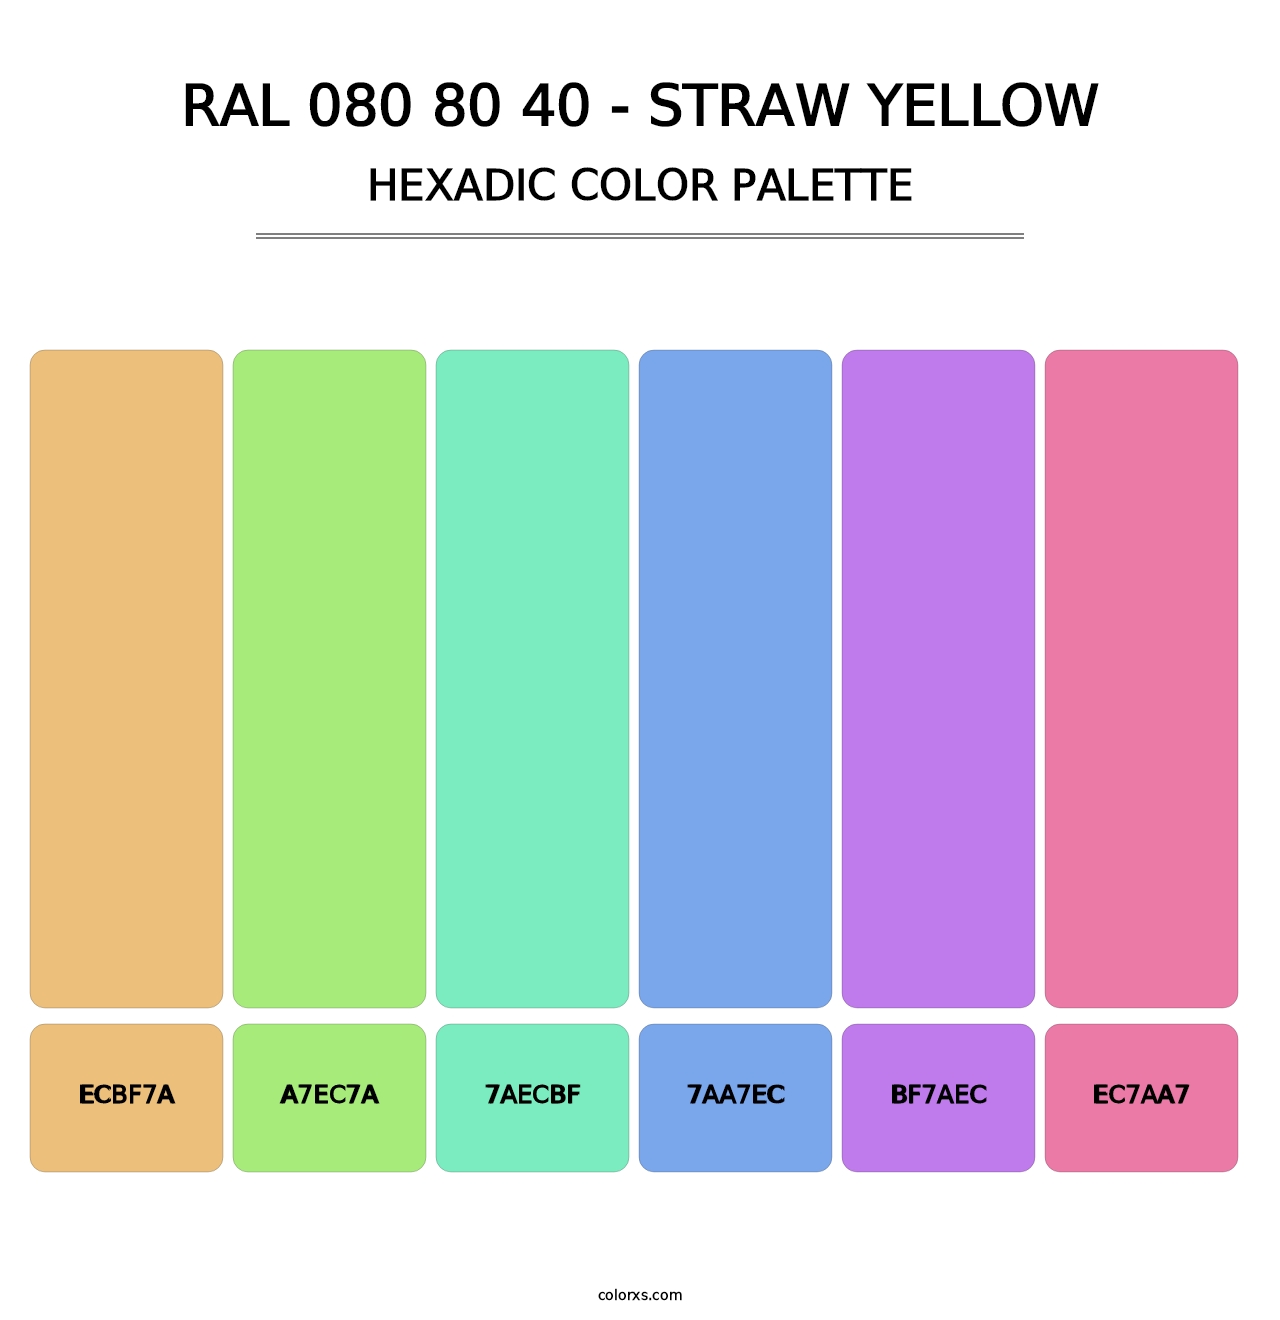 RAL 080 80 40 - Straw Yellow - Hexadic Color Palette